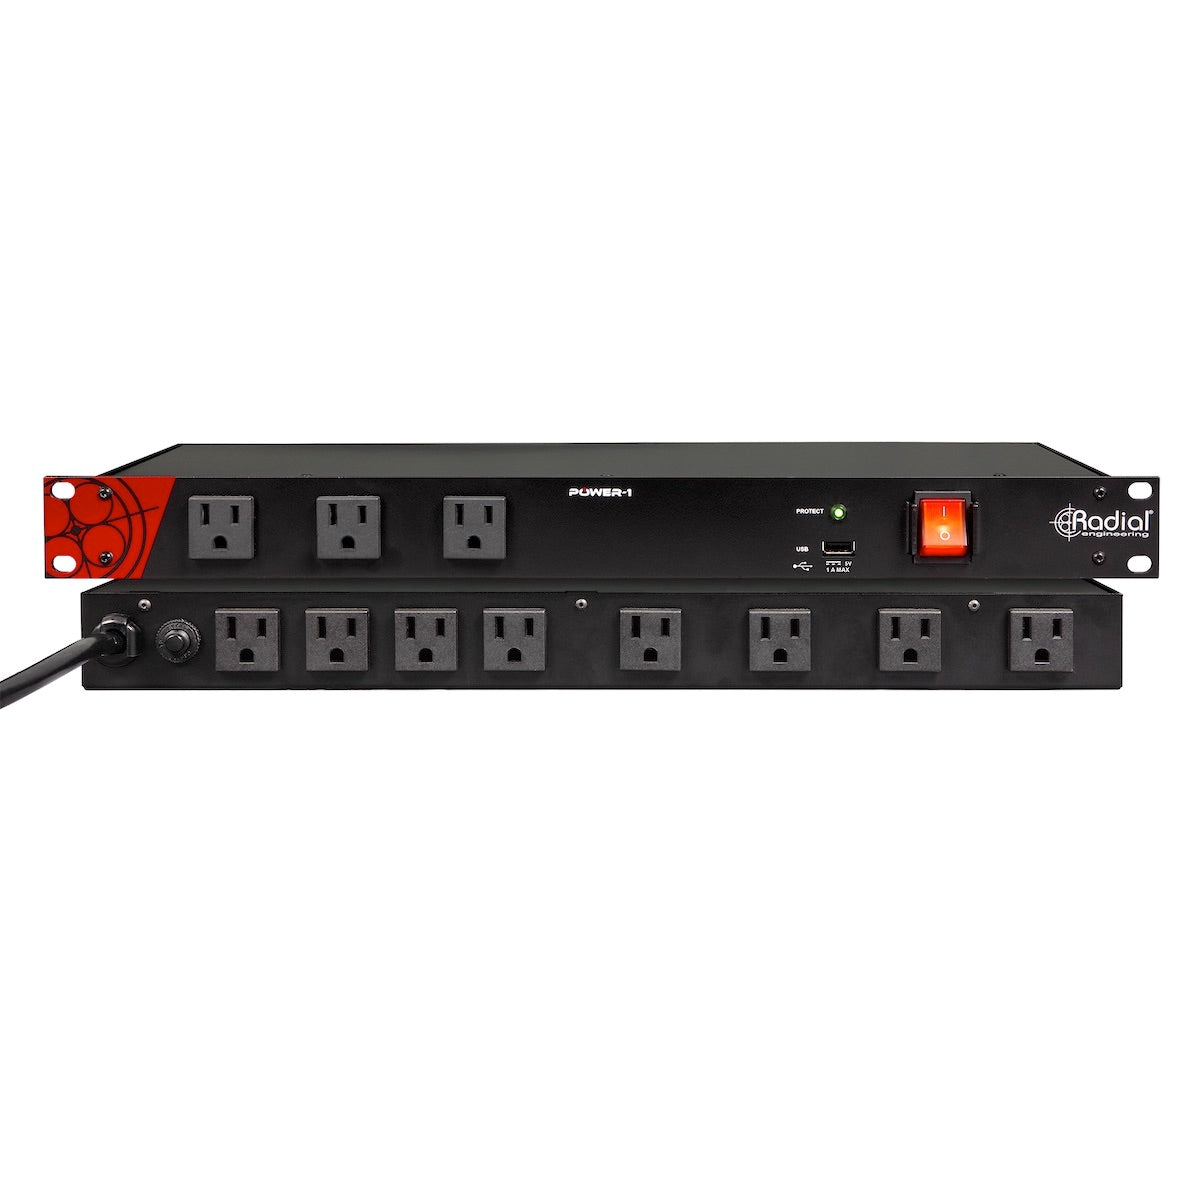 Radial Power-1 Rackmount Power Conditioner Surge Suppressor, front and rear views